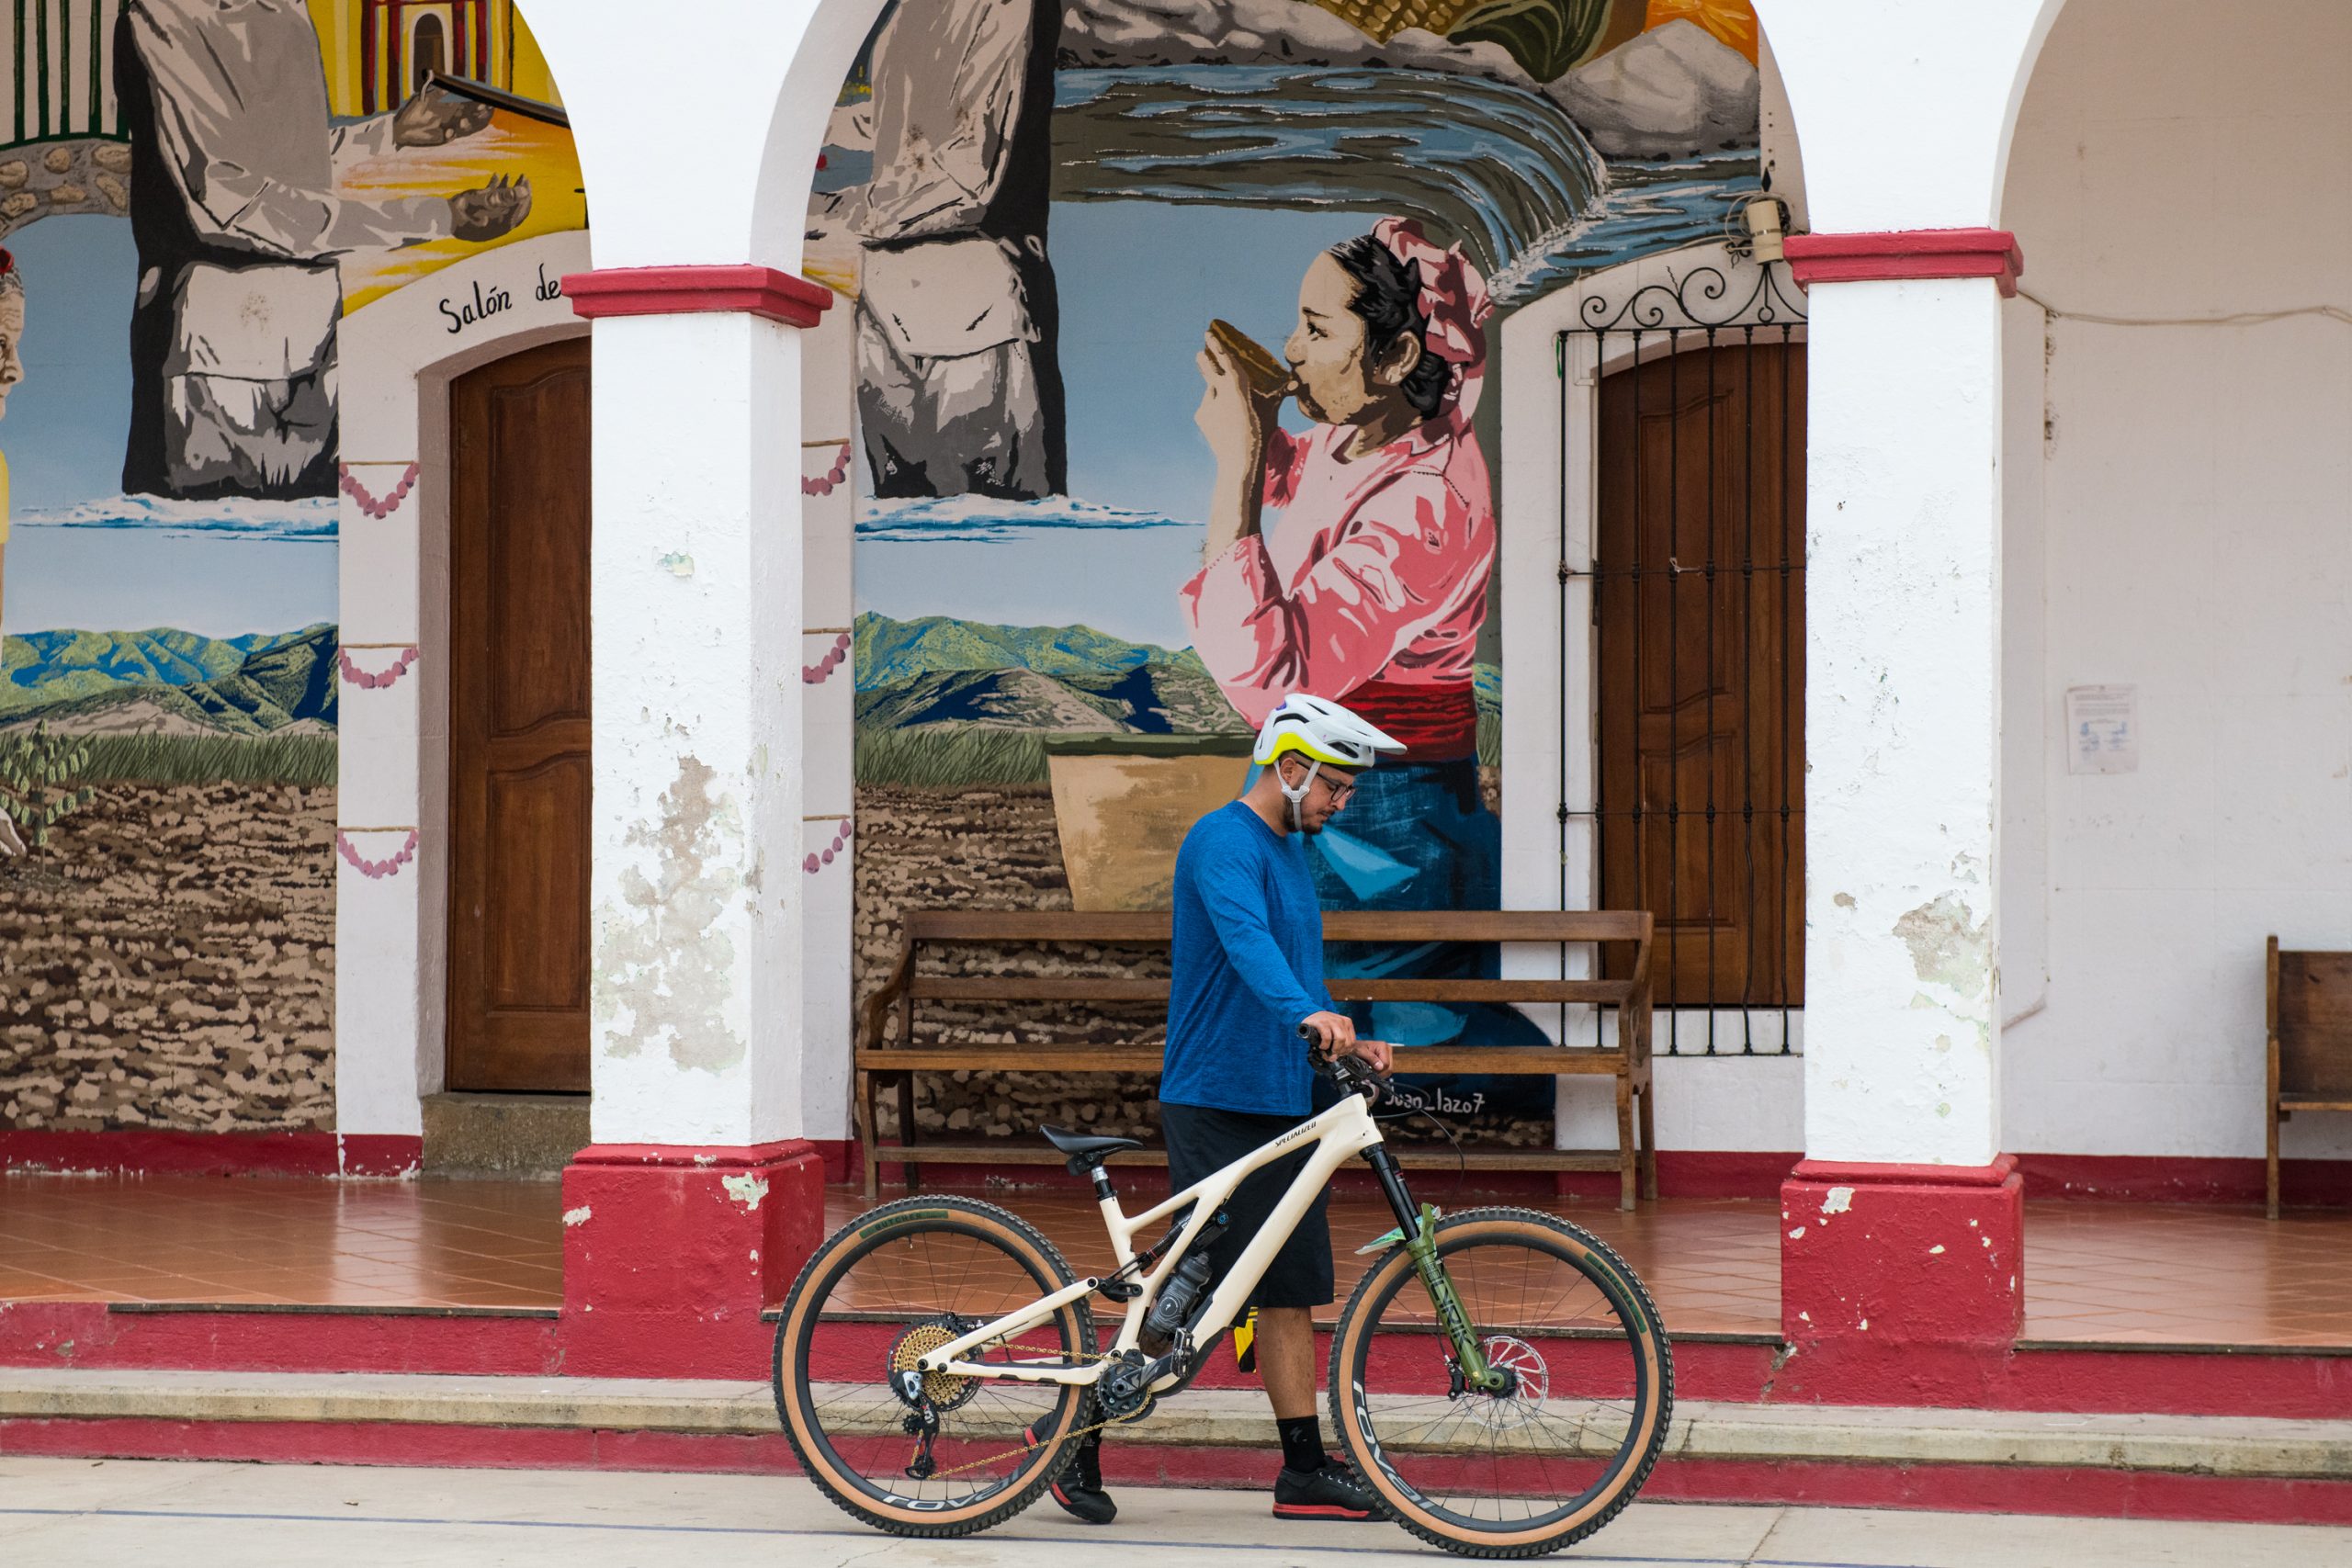 A mountain biker walks his bike in front of a mural of a local woman in a bright pink blouse drinking from a bowl, set against a pastoral scene of farm fields and low hills behind.